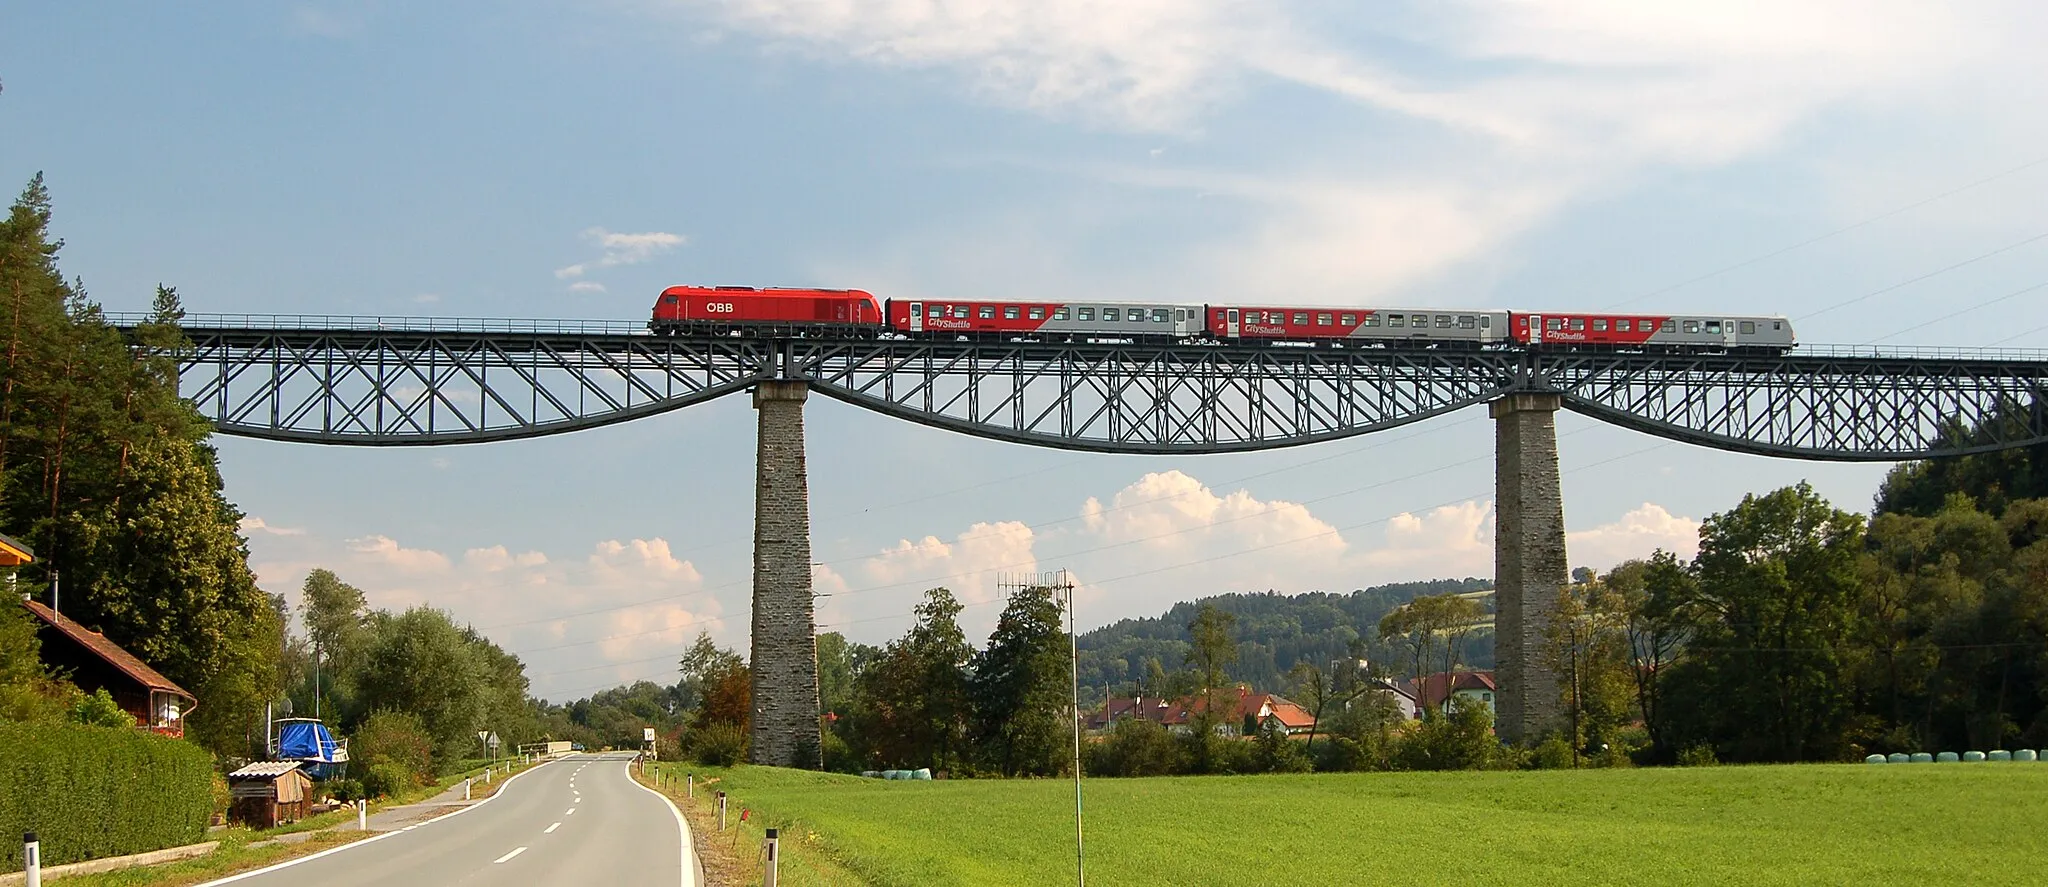 Photo showing: The railway bridge of the Styrian Thermenbahn crossing the Lafnitz Valley near Rohrbach an der Lafnitz, Styria. Train going north to Friedberg.